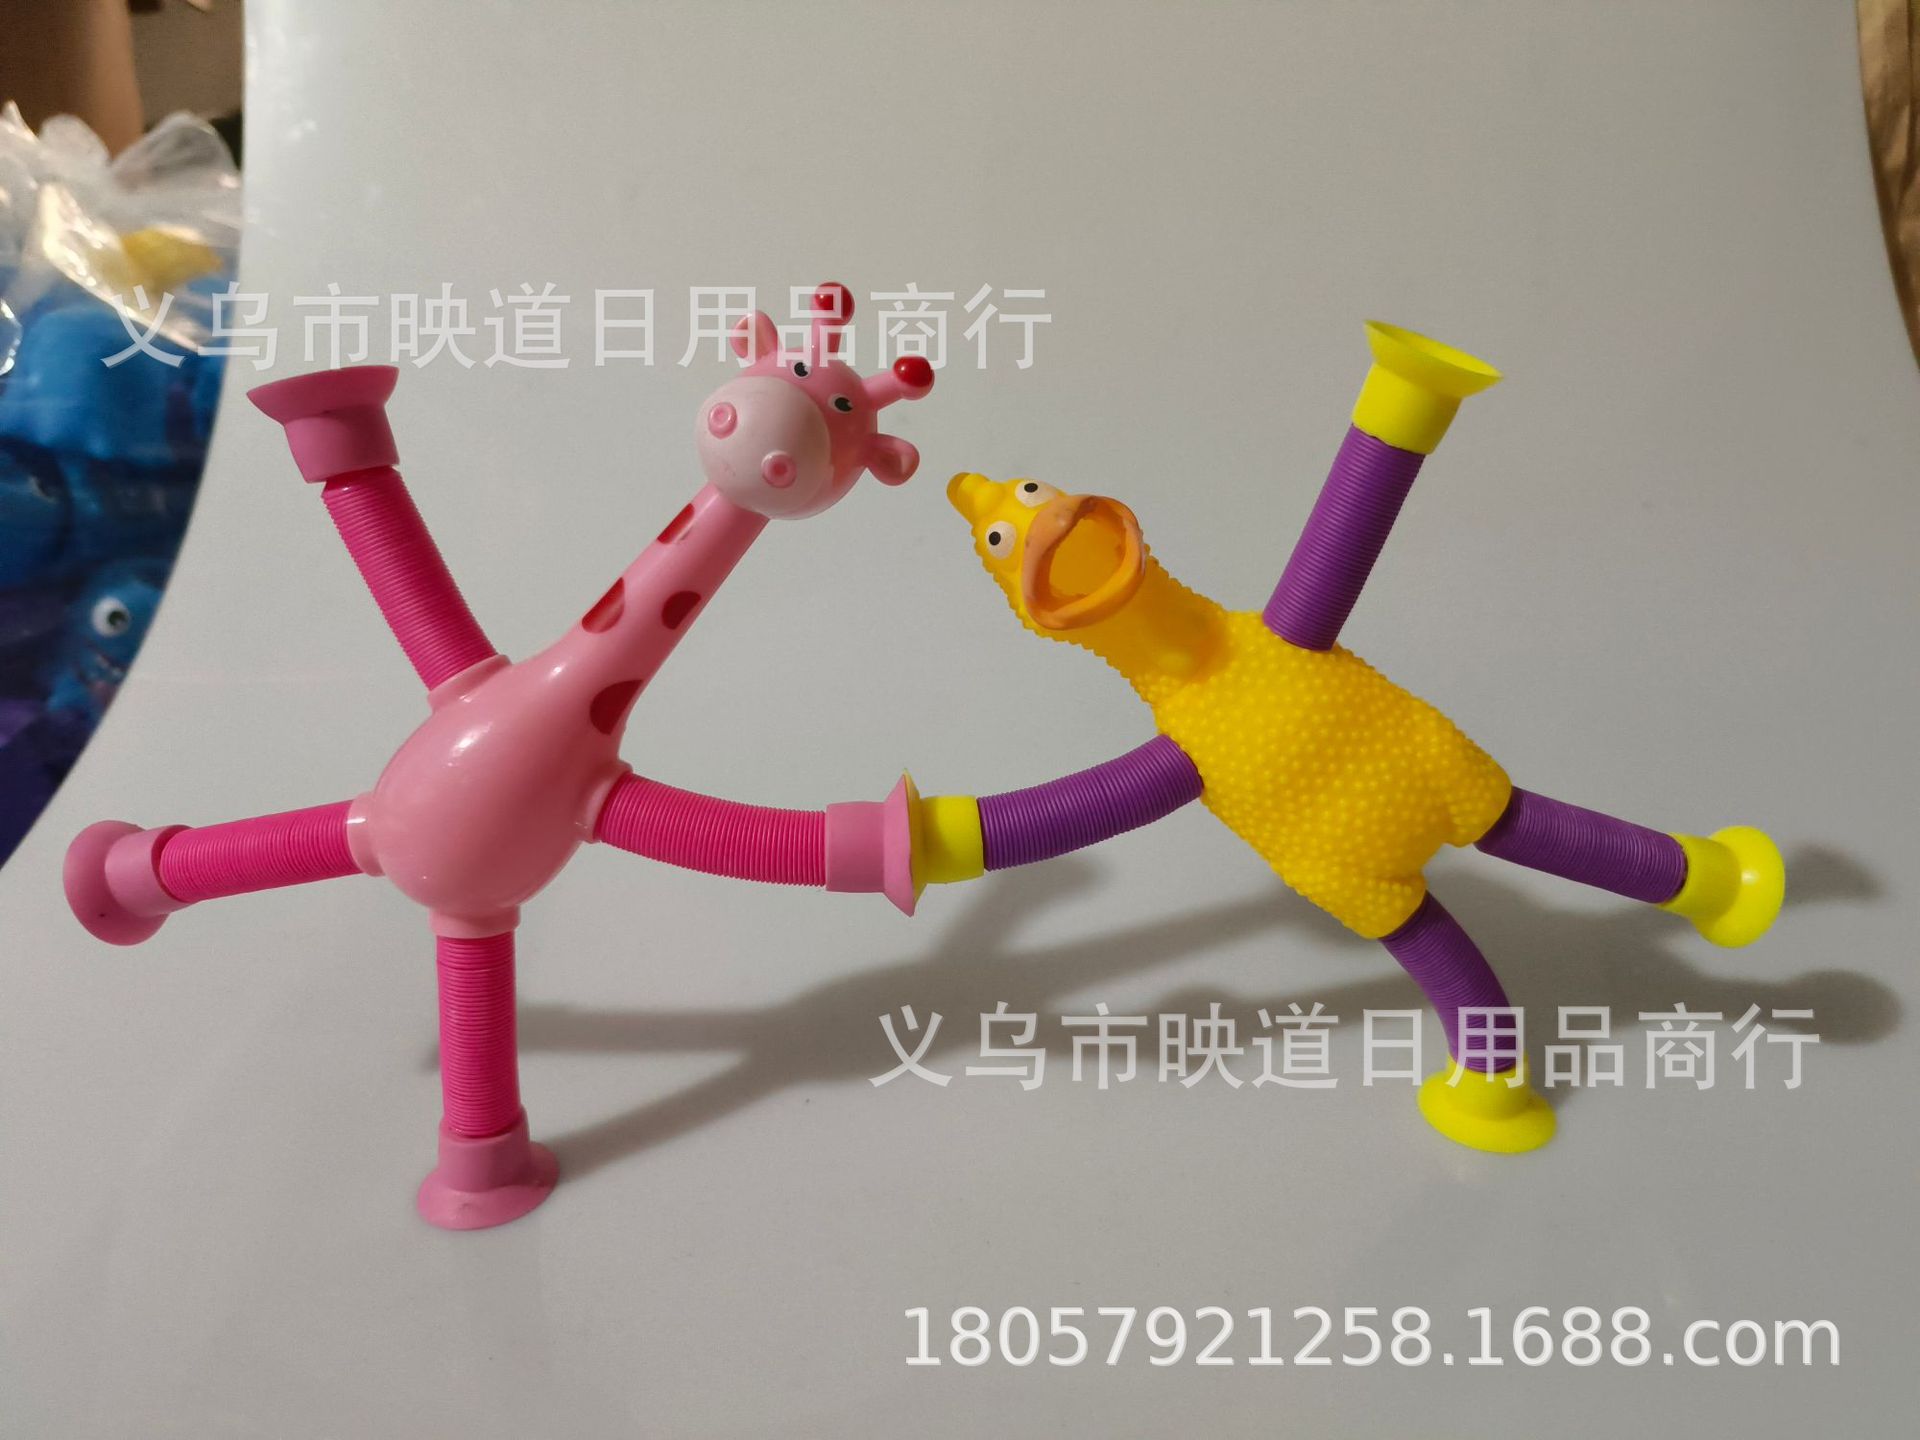 Variety Retractable Screaming Chicken Pull Tube Sucker Giraffe Cute Robot Trick-Or-Treat Egg Waffle Pull Tube Toy